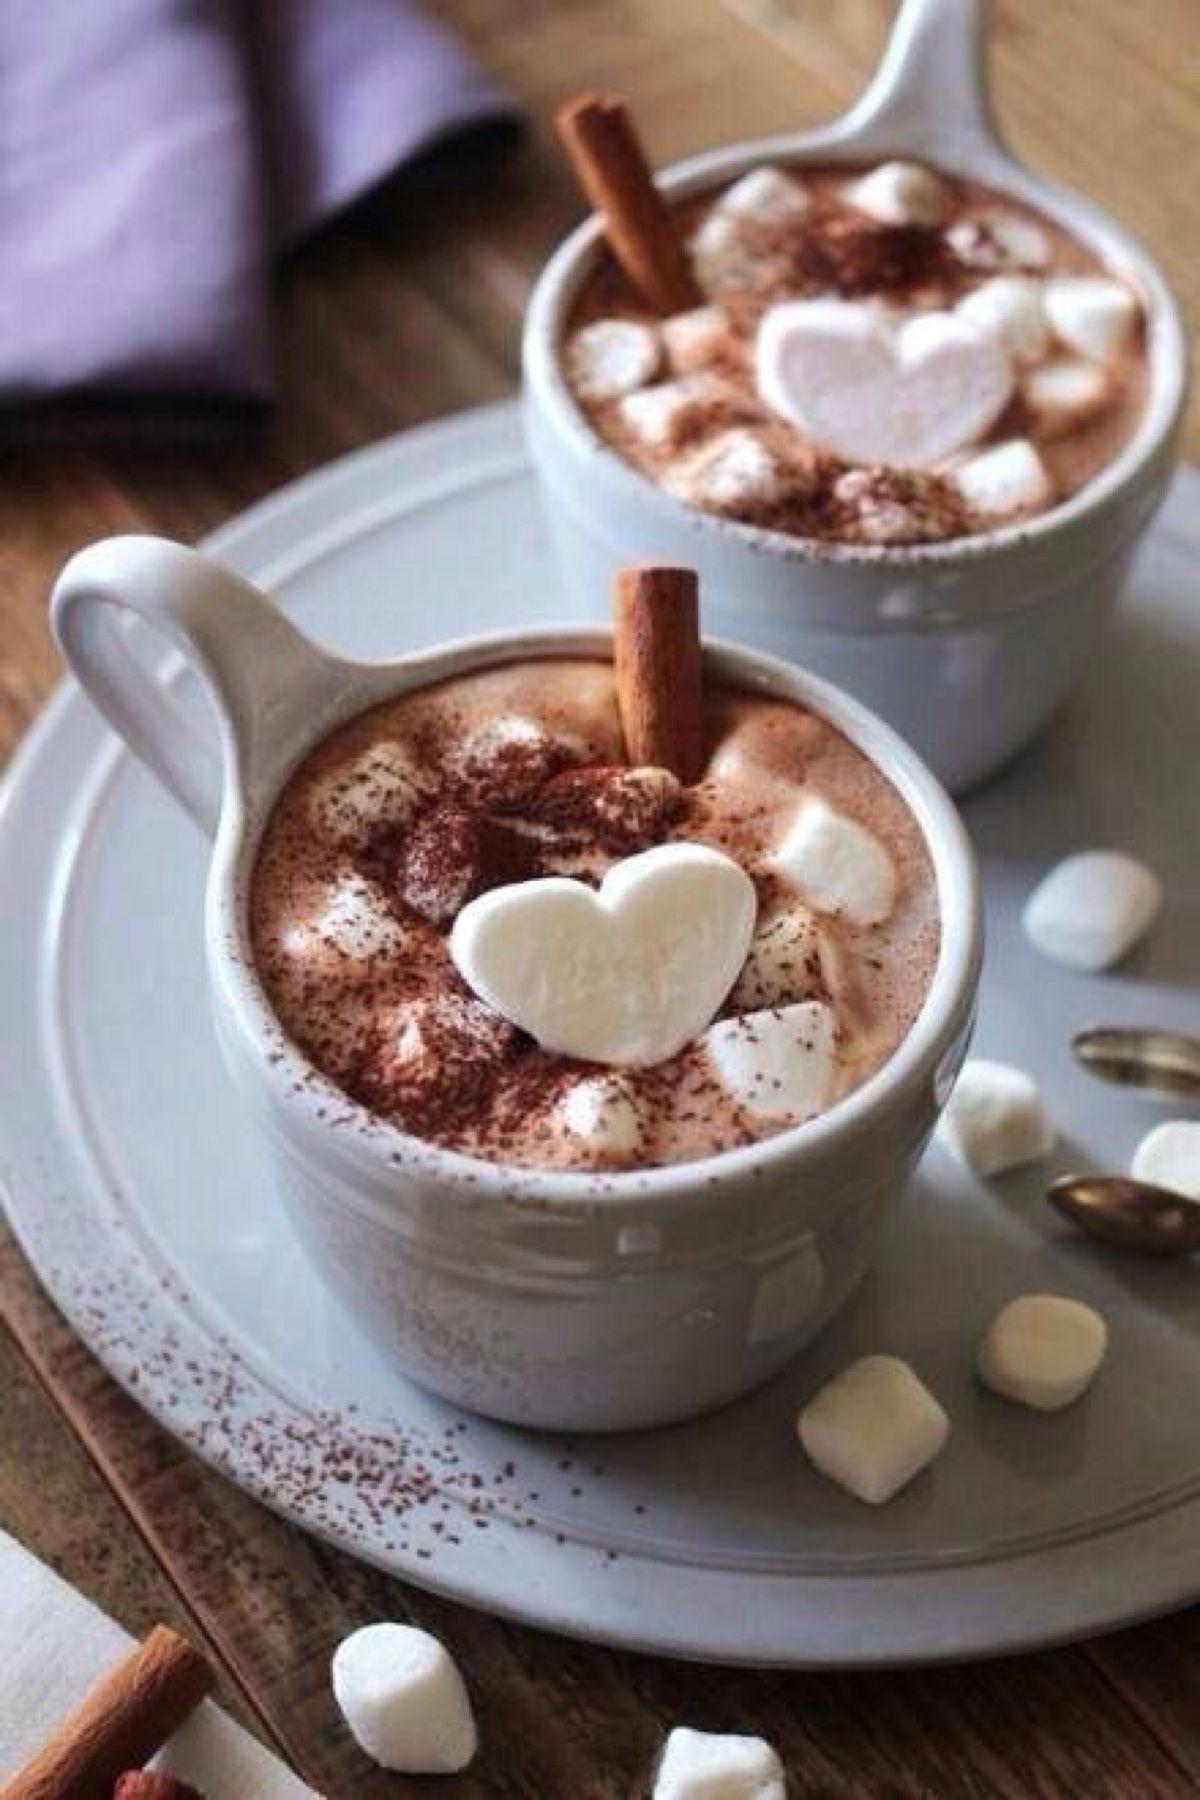 Mobile HD Wallpaper. CUPS HOT CHOCOLATE HEARTS MARSHMALLOW